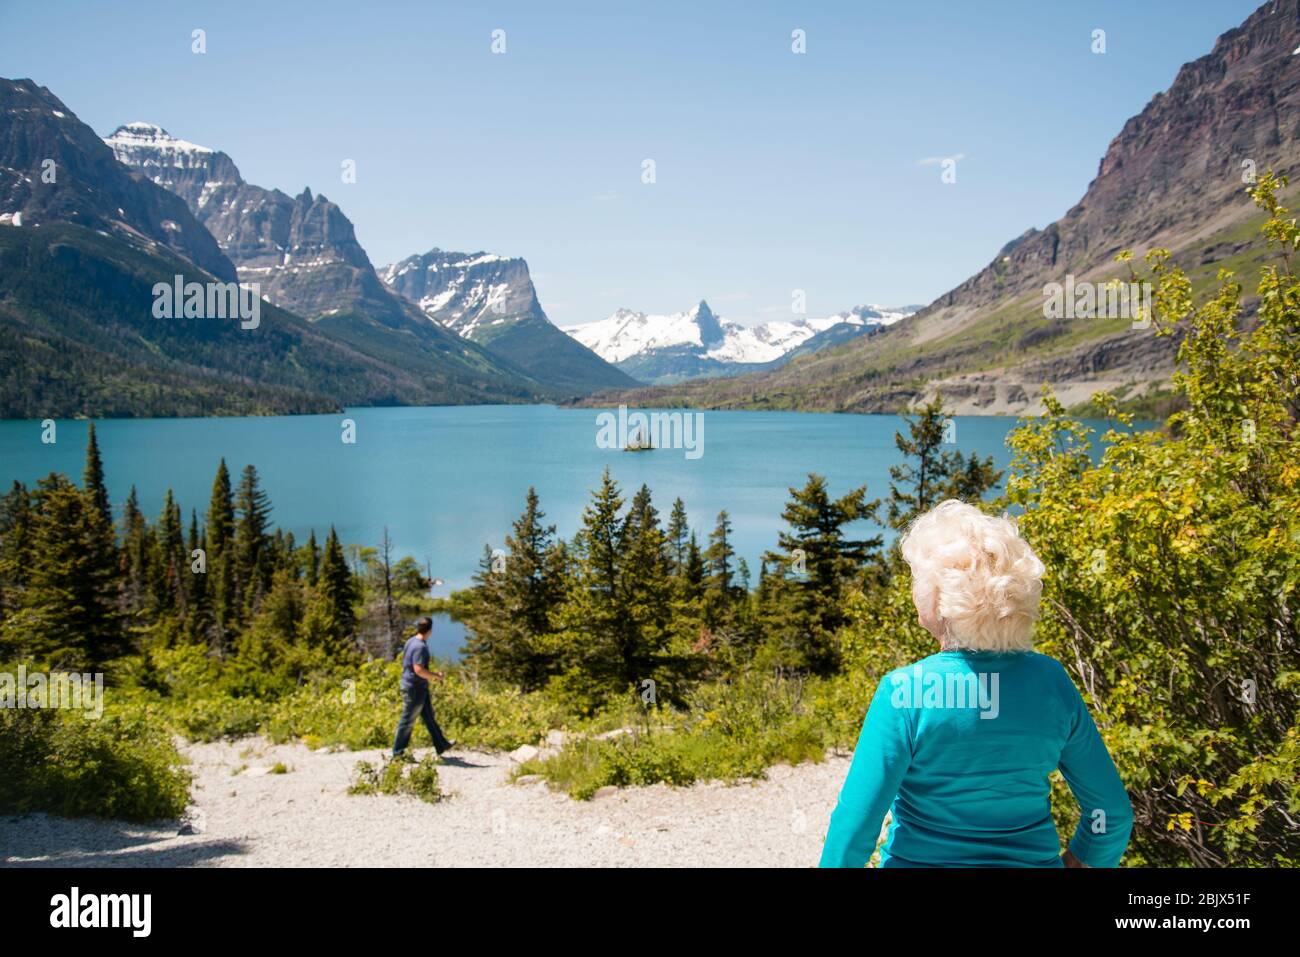 70 year old senior tourist woman looking at mountains, lake scenic view. Enjoying the beauty of nature at Glacier National Park. Copy space background Stock Photo